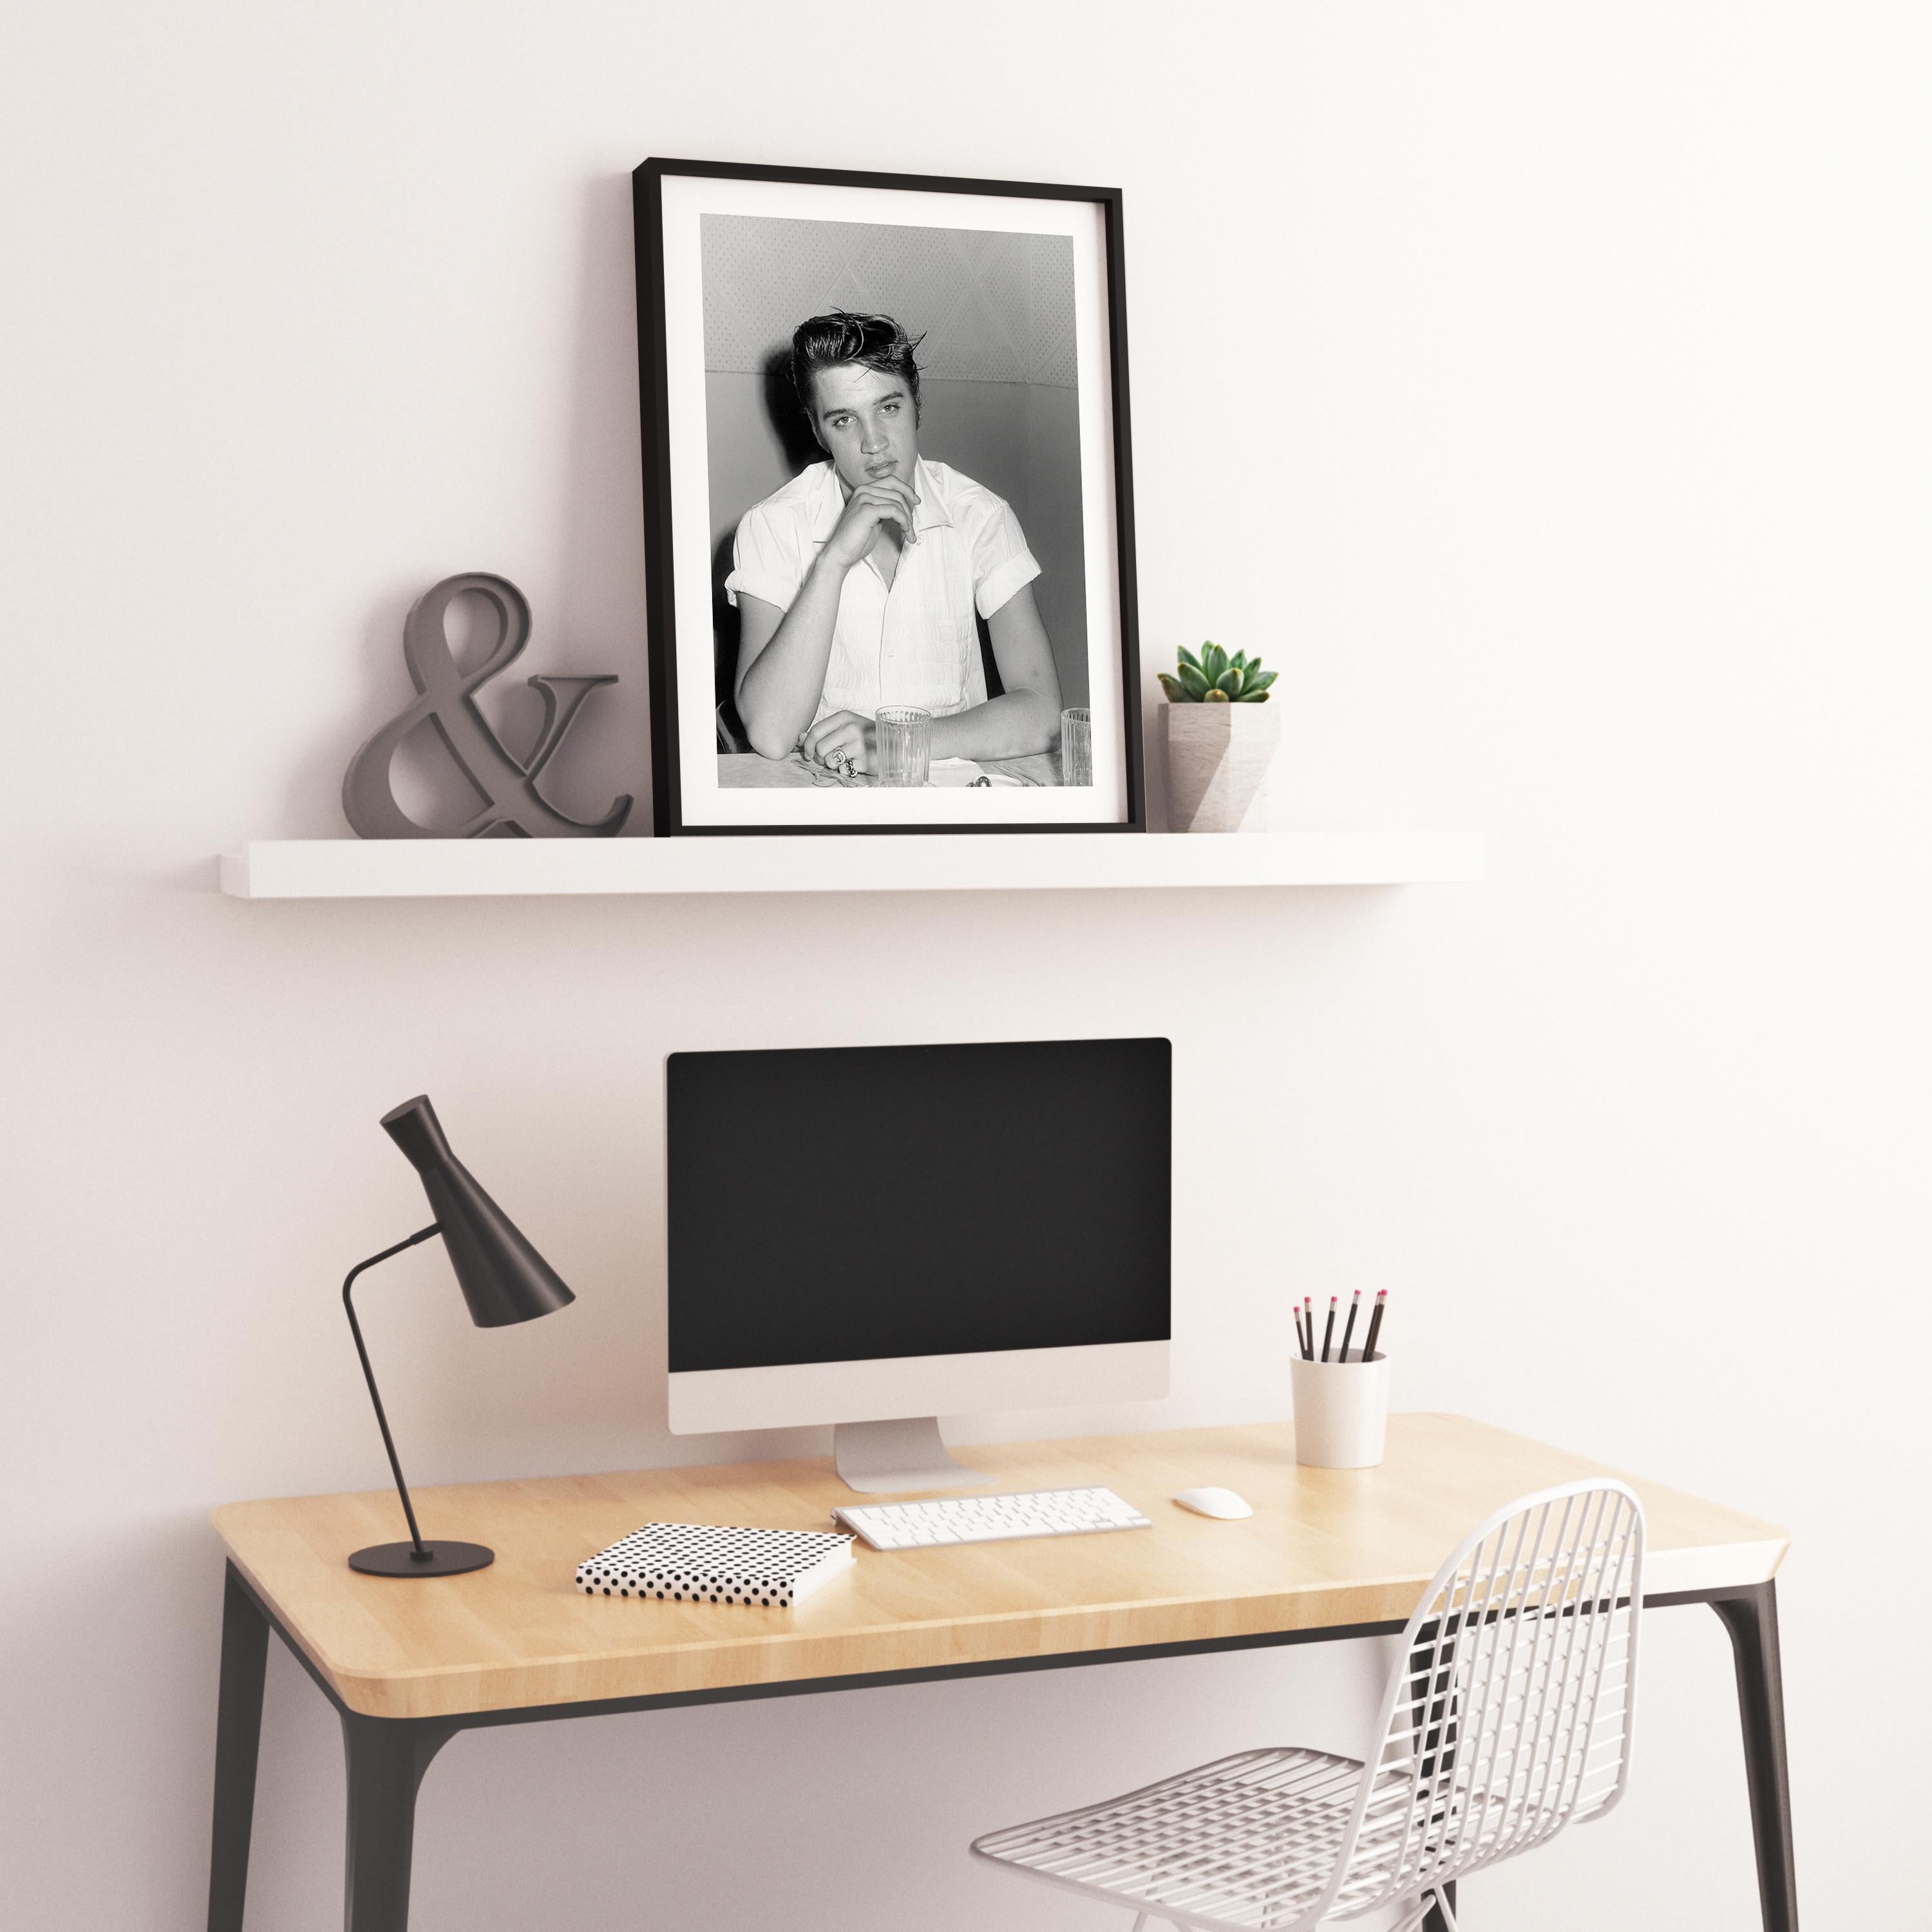 This awesome black and white portrait features Elvis Presley in his younger years, candid and seated at a table.

Elvis Presley was an American singer and actor. Regarded as one of the most significant cultural icons of the 20th century, he is often